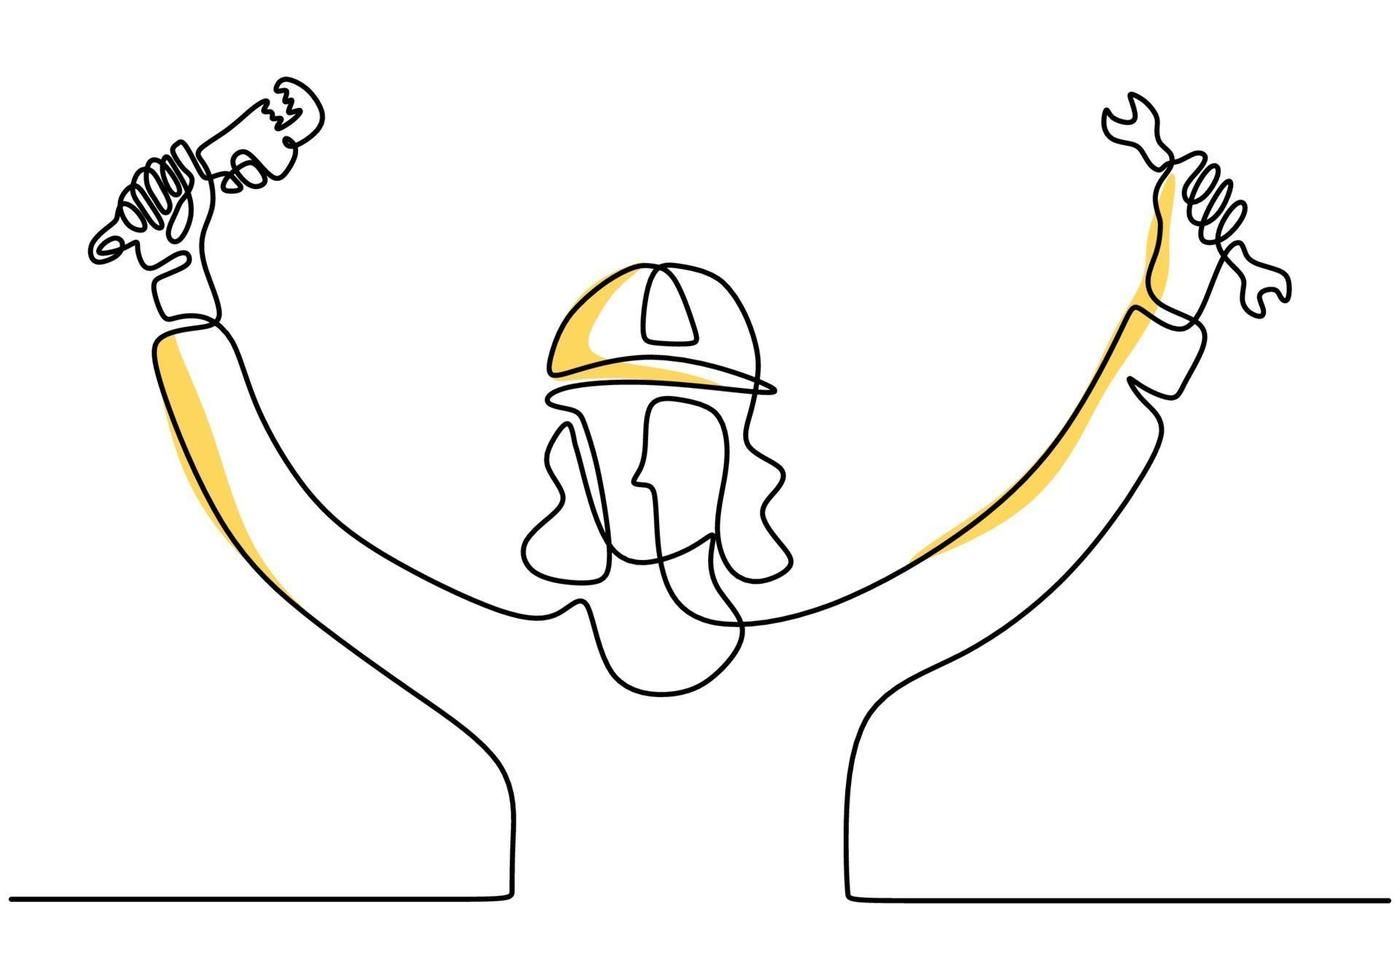 Continuous one line drawing of young woman mechanic wearing hard hat and standing pose while holding set of wrench. Professional job profession minimalist concept. Vector illustration